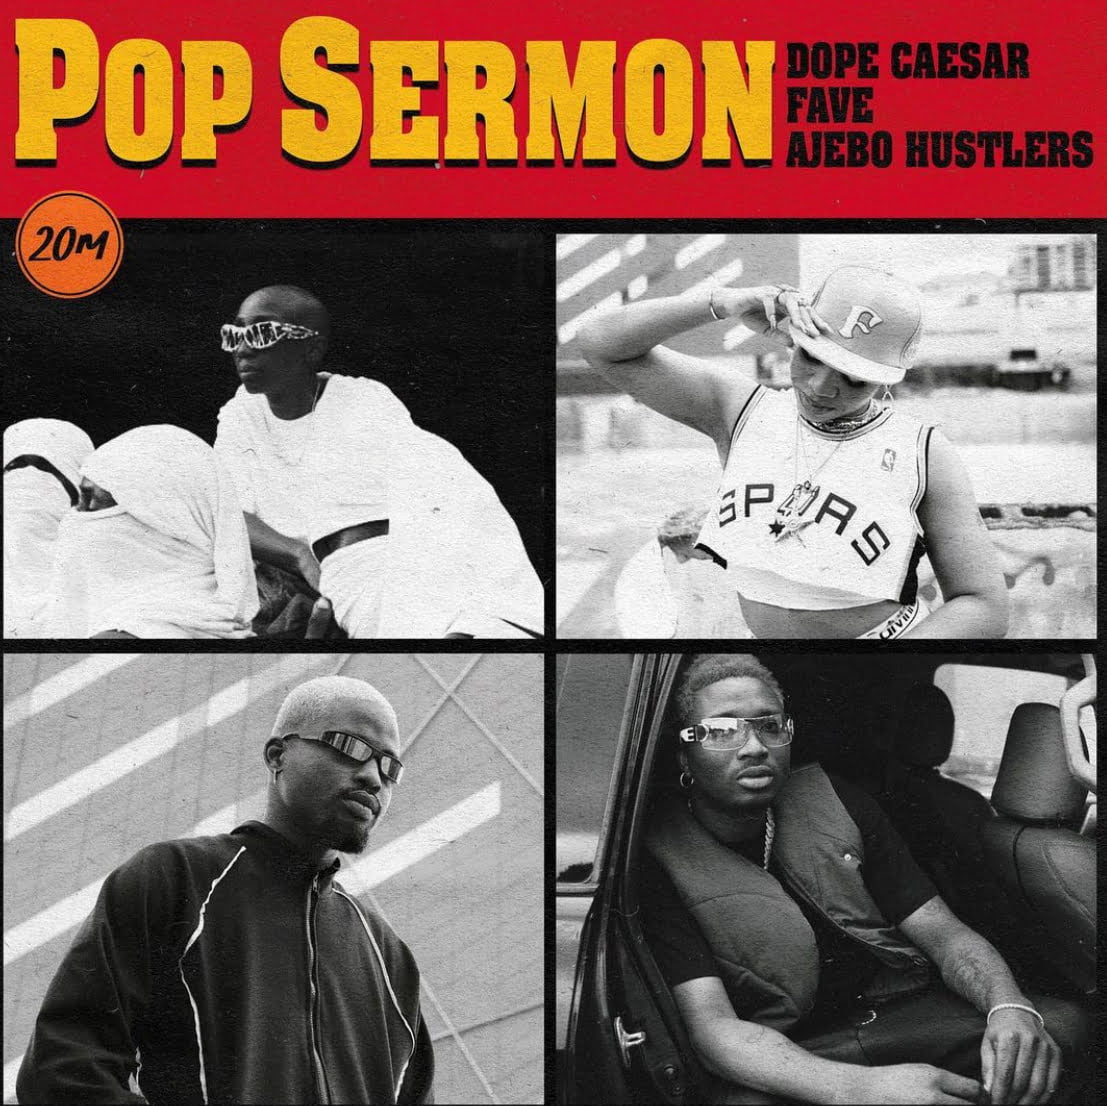 New Music- Dope Caesar feat Fave and Ajebo Hustlers Pop Sermon